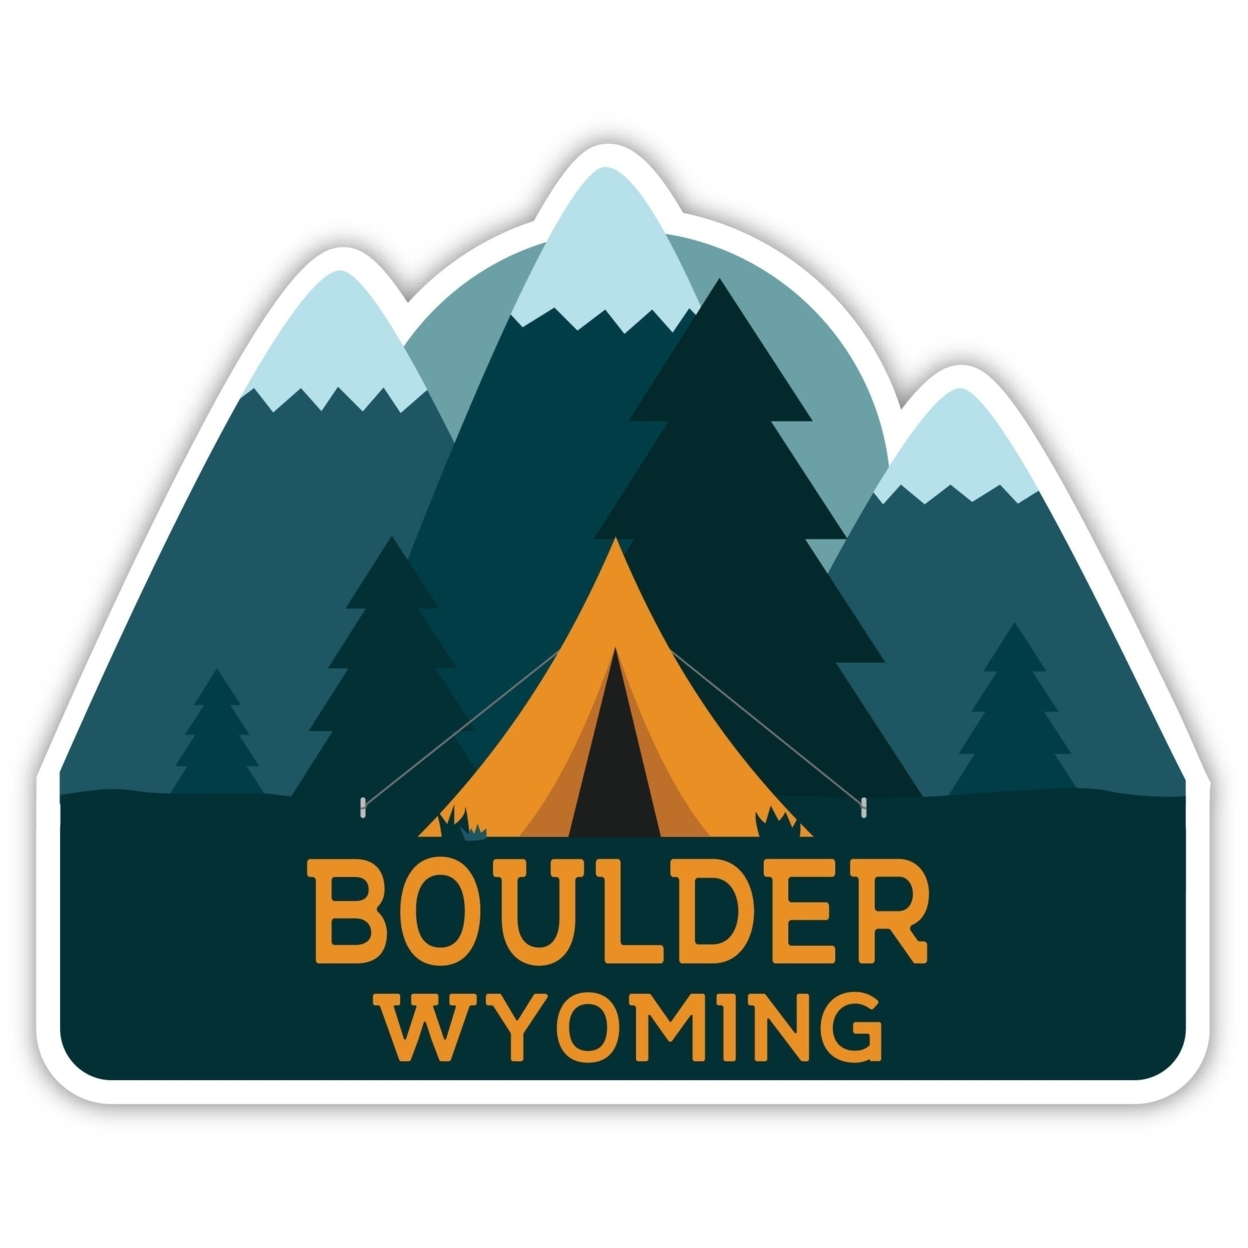 Boulder Wyoming Souvenir Decorative Stickers (Choose Theme And Size) - 4-Pack, 2-Inch, Tent